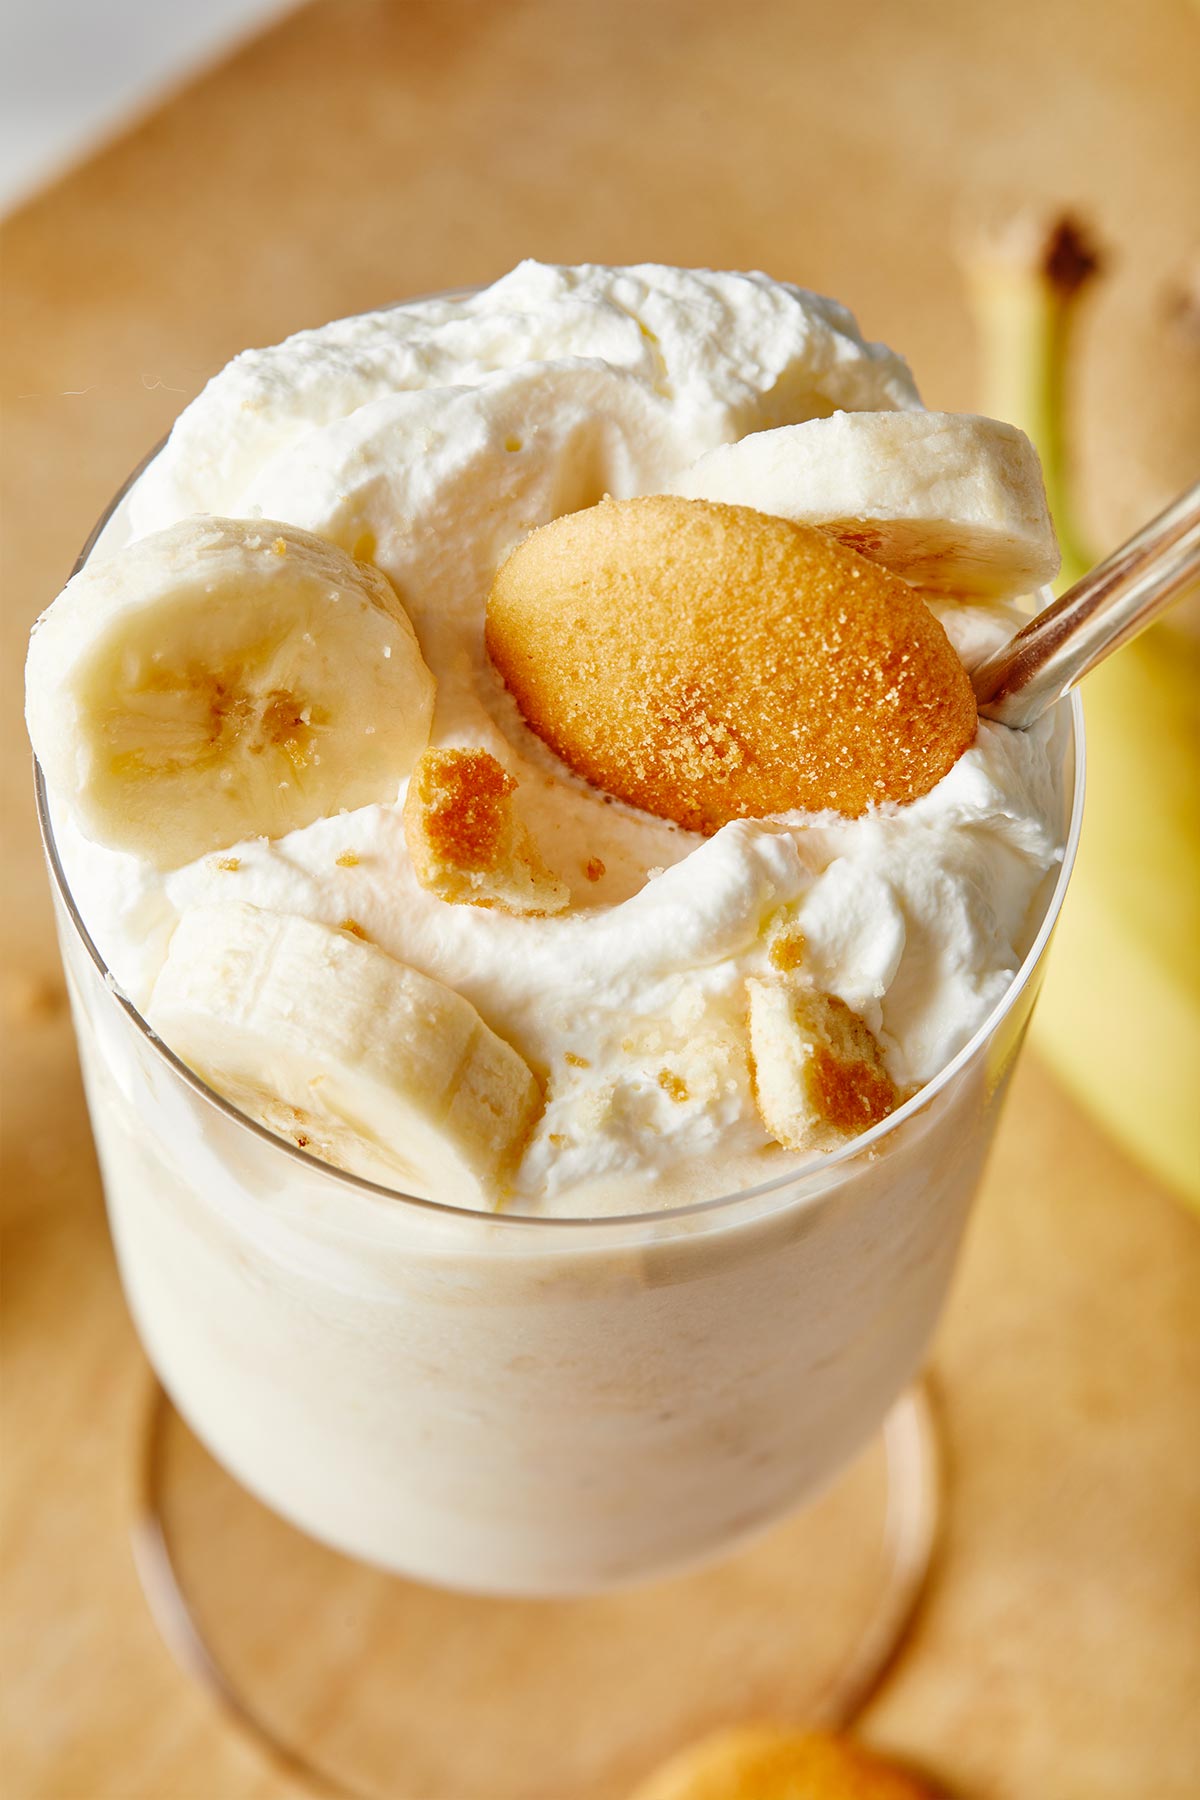 A close up of banana ice cream milkshake with some spilling over the glass ready to serve